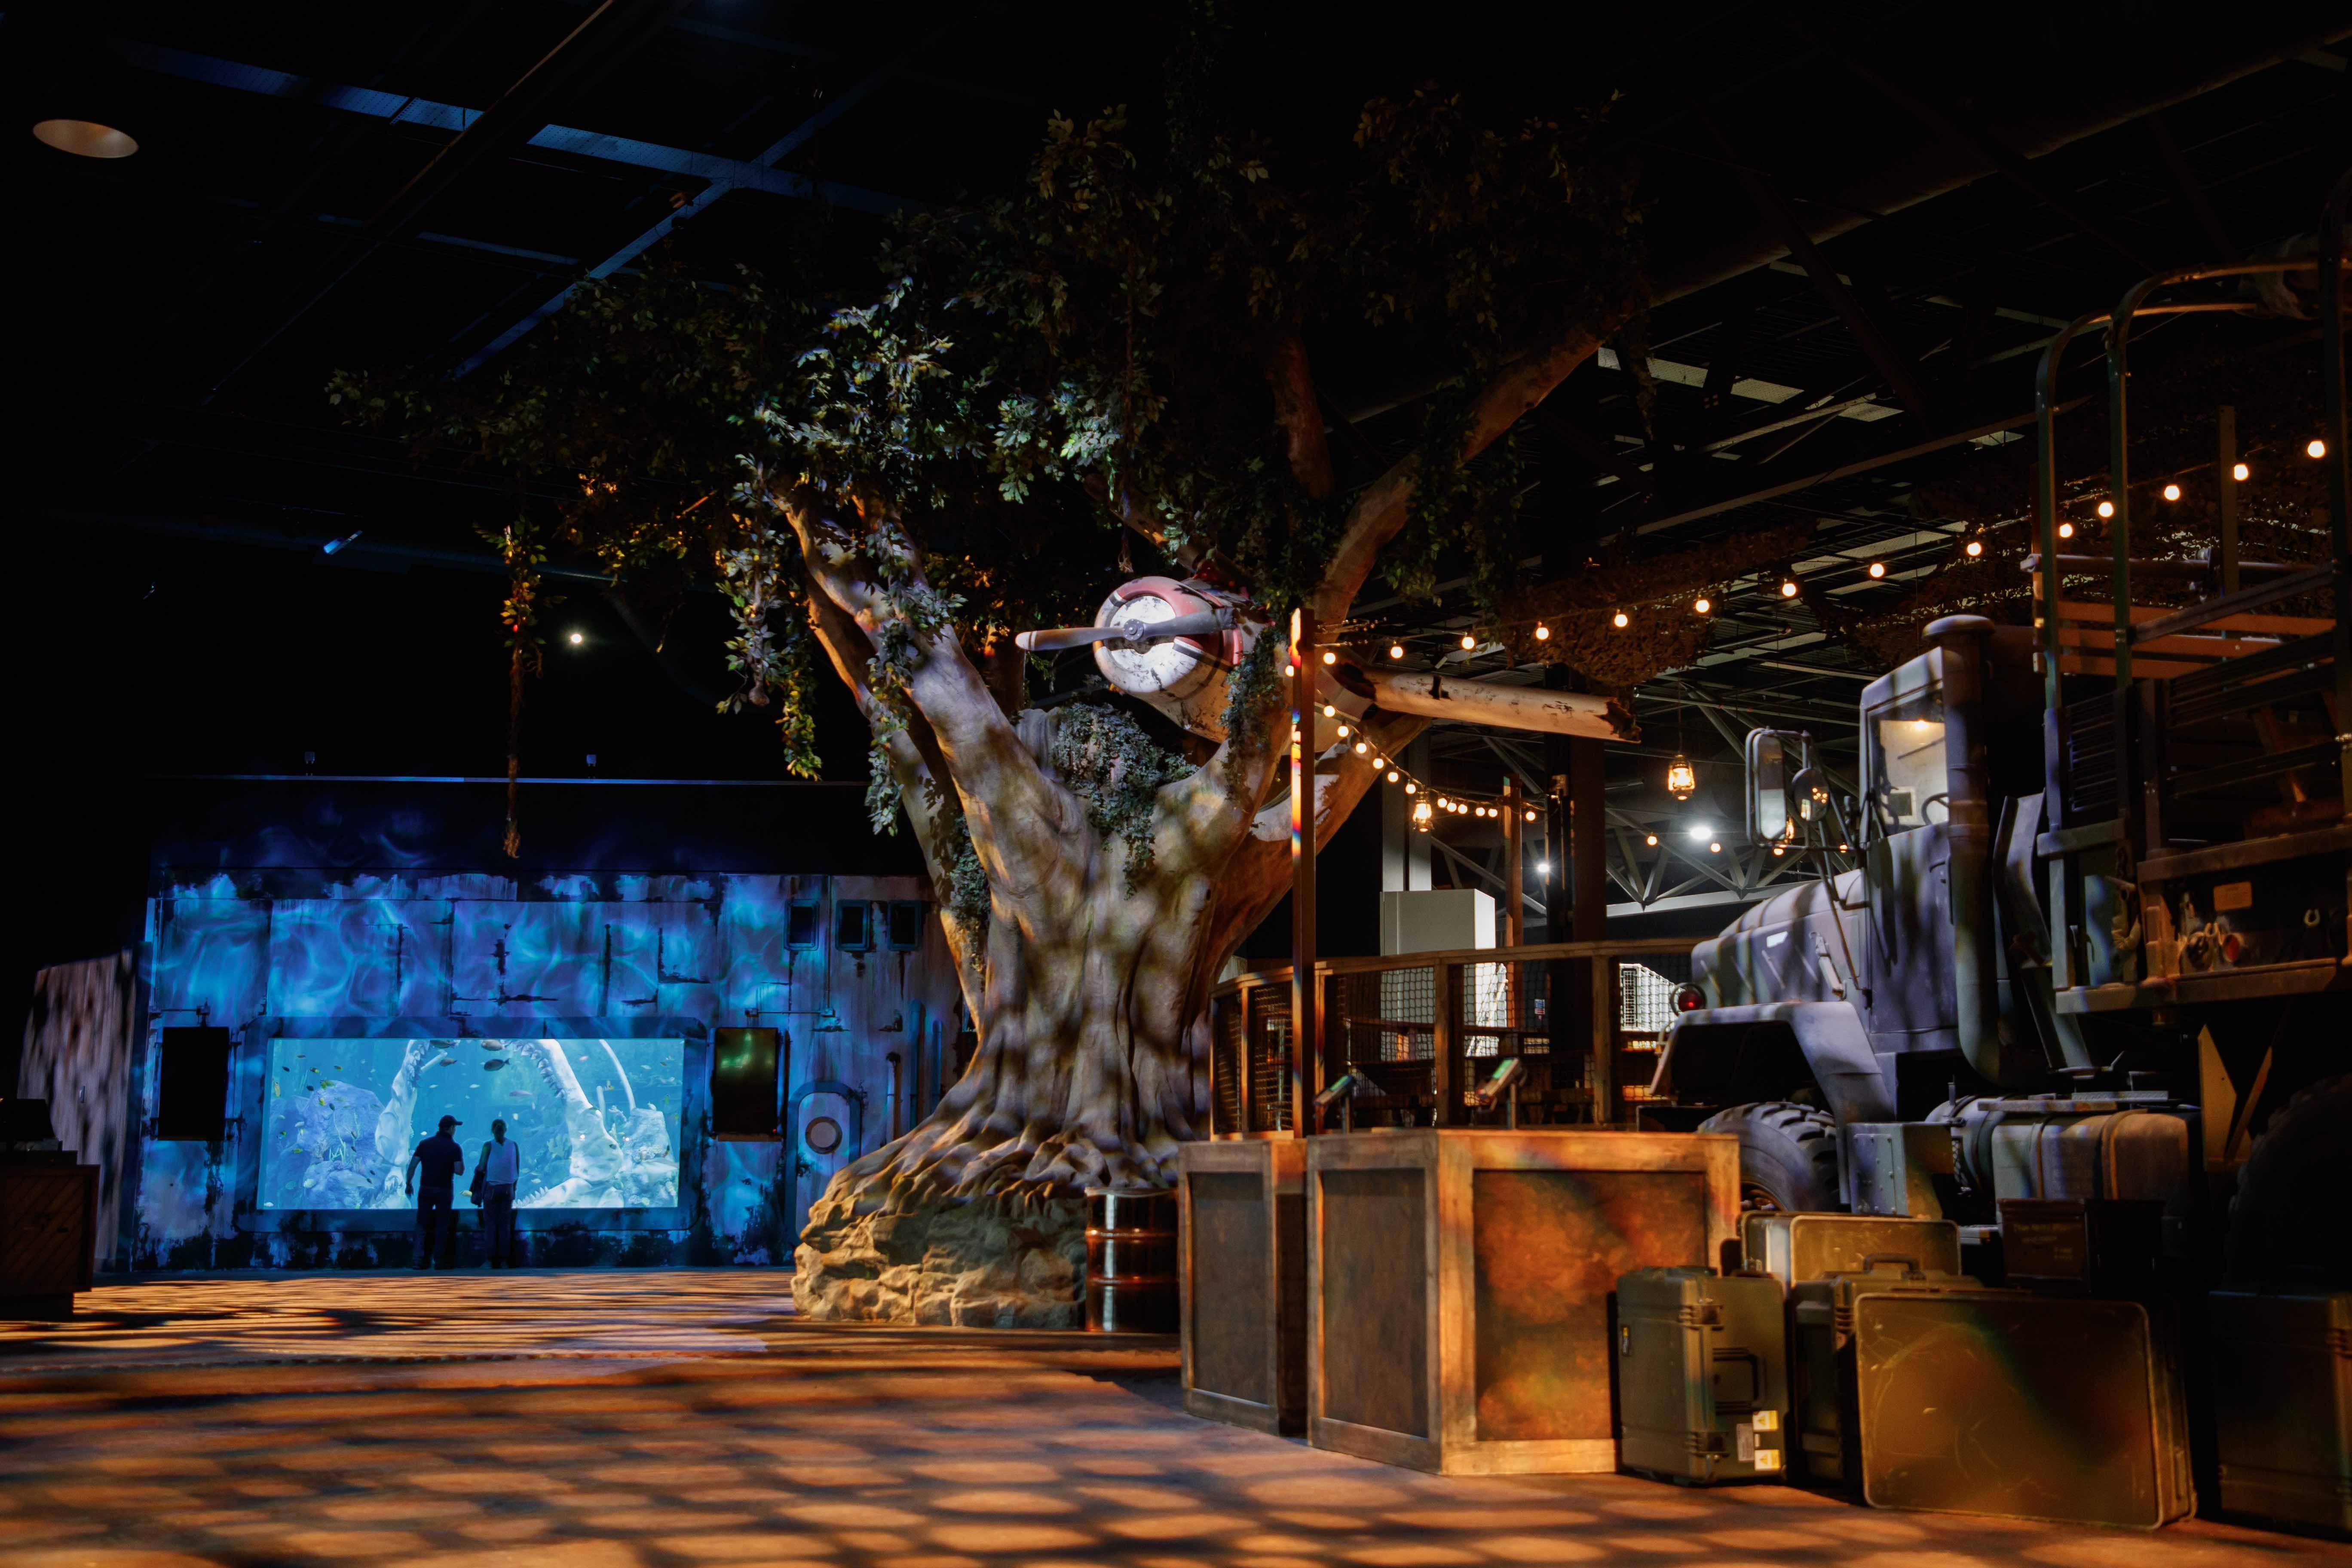 The Bear Grylls Adventure, Birmingham. Interier of site. Large fish tank in the background with a  whale jaw bone inside. An artificial tree with fairy lights and a plane in the branches. Explorer style suitcases, boxes and green canisters.